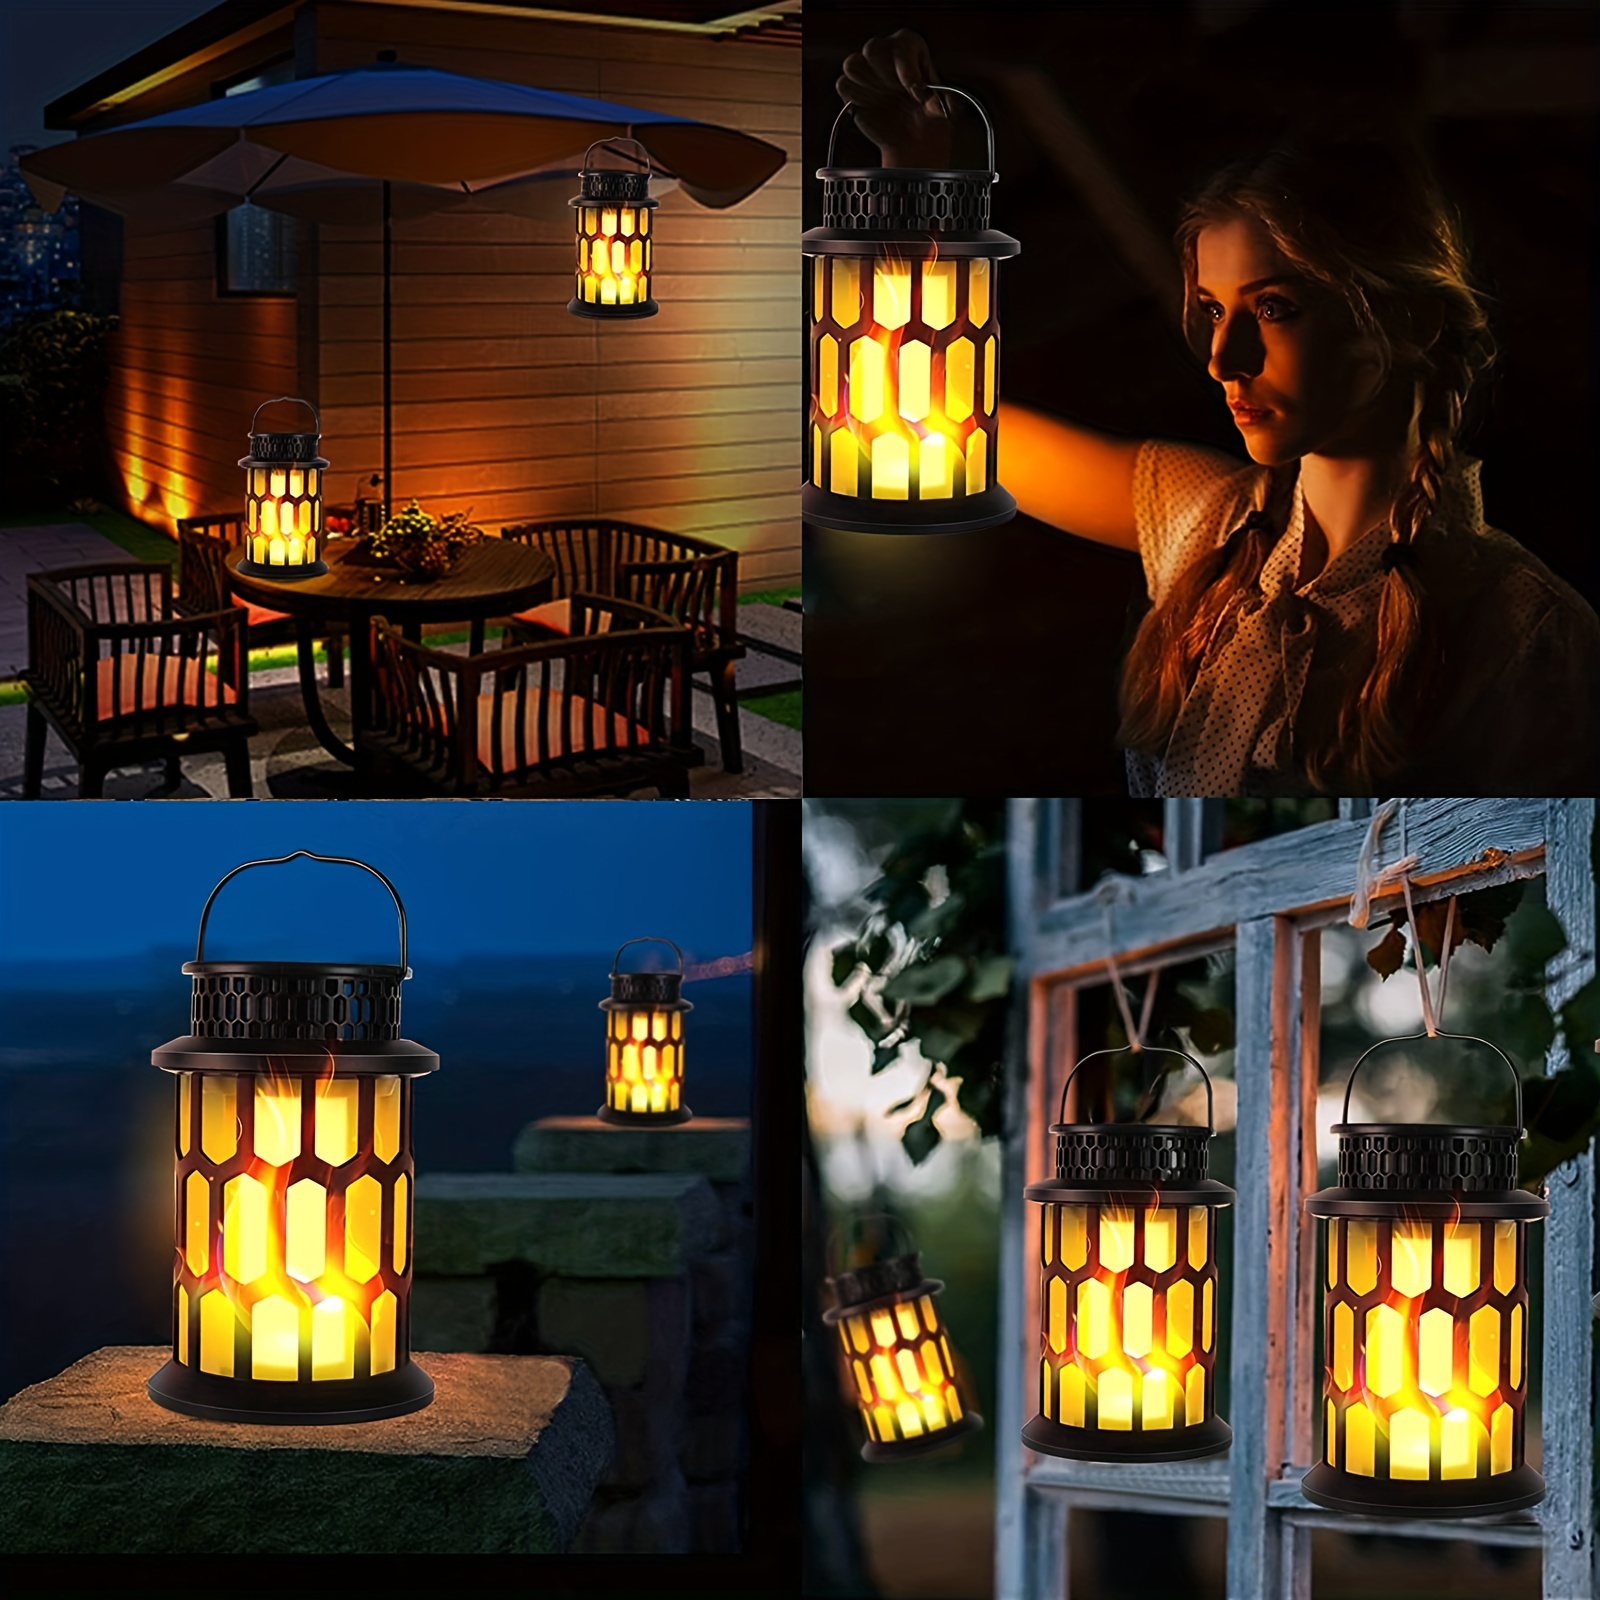 Outdoor Solar Lantern Torch Lights with Flickering Flame Waterproof Metal  LED Decorative Garden Lights Solar Tabletop Lamp for Yard Patio Pathway